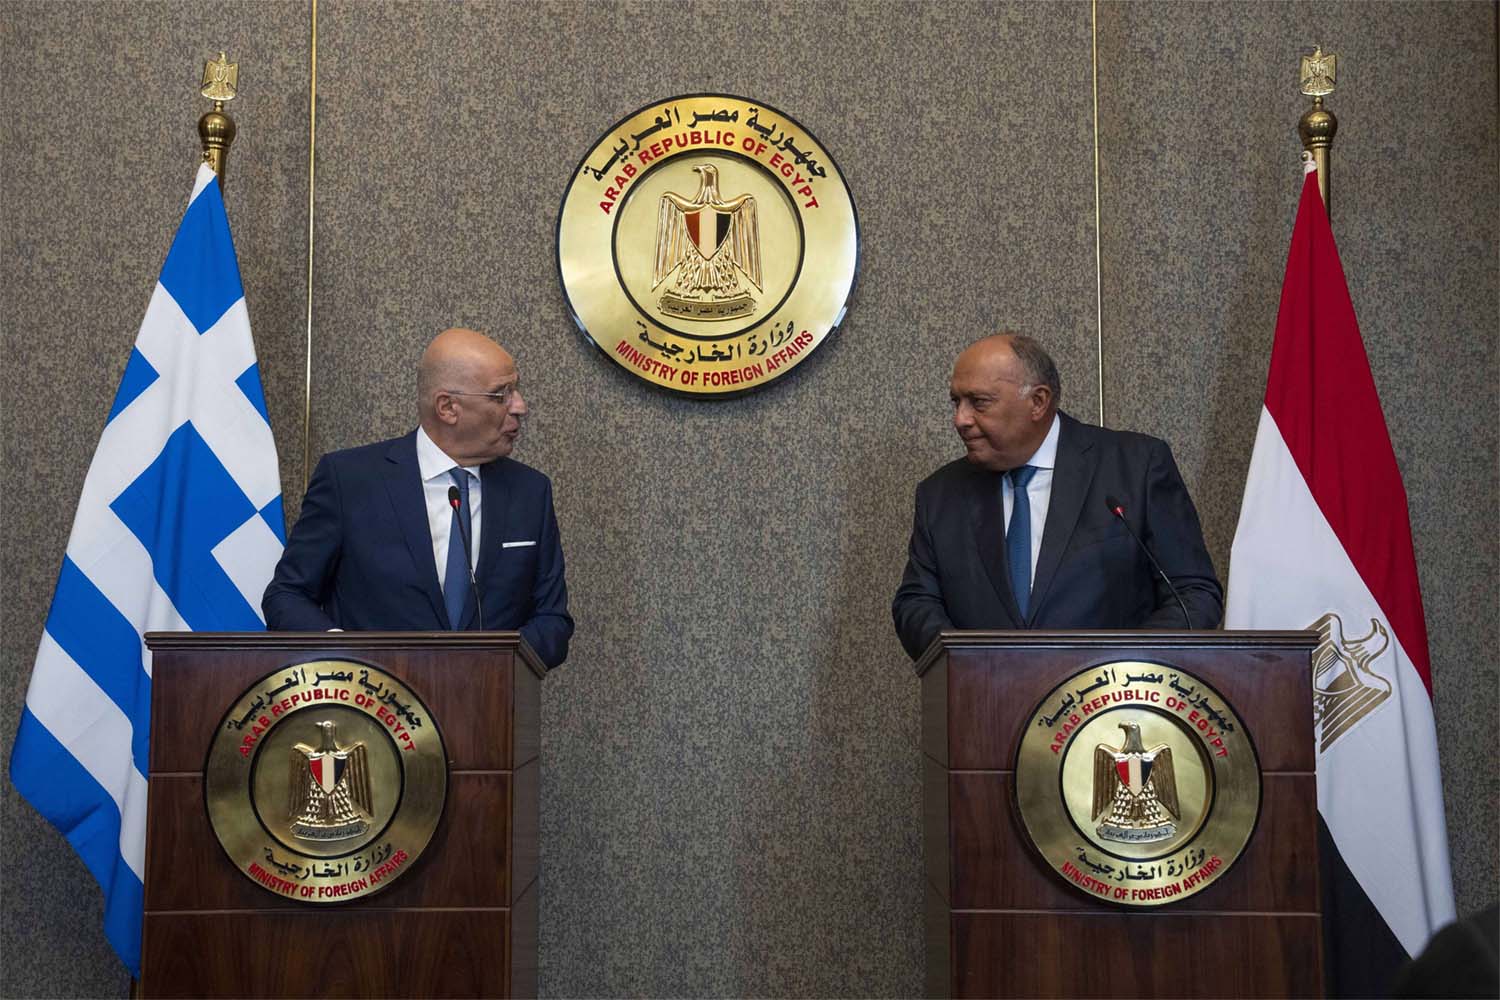 Cairo and Athens have strengthened ties in recent years